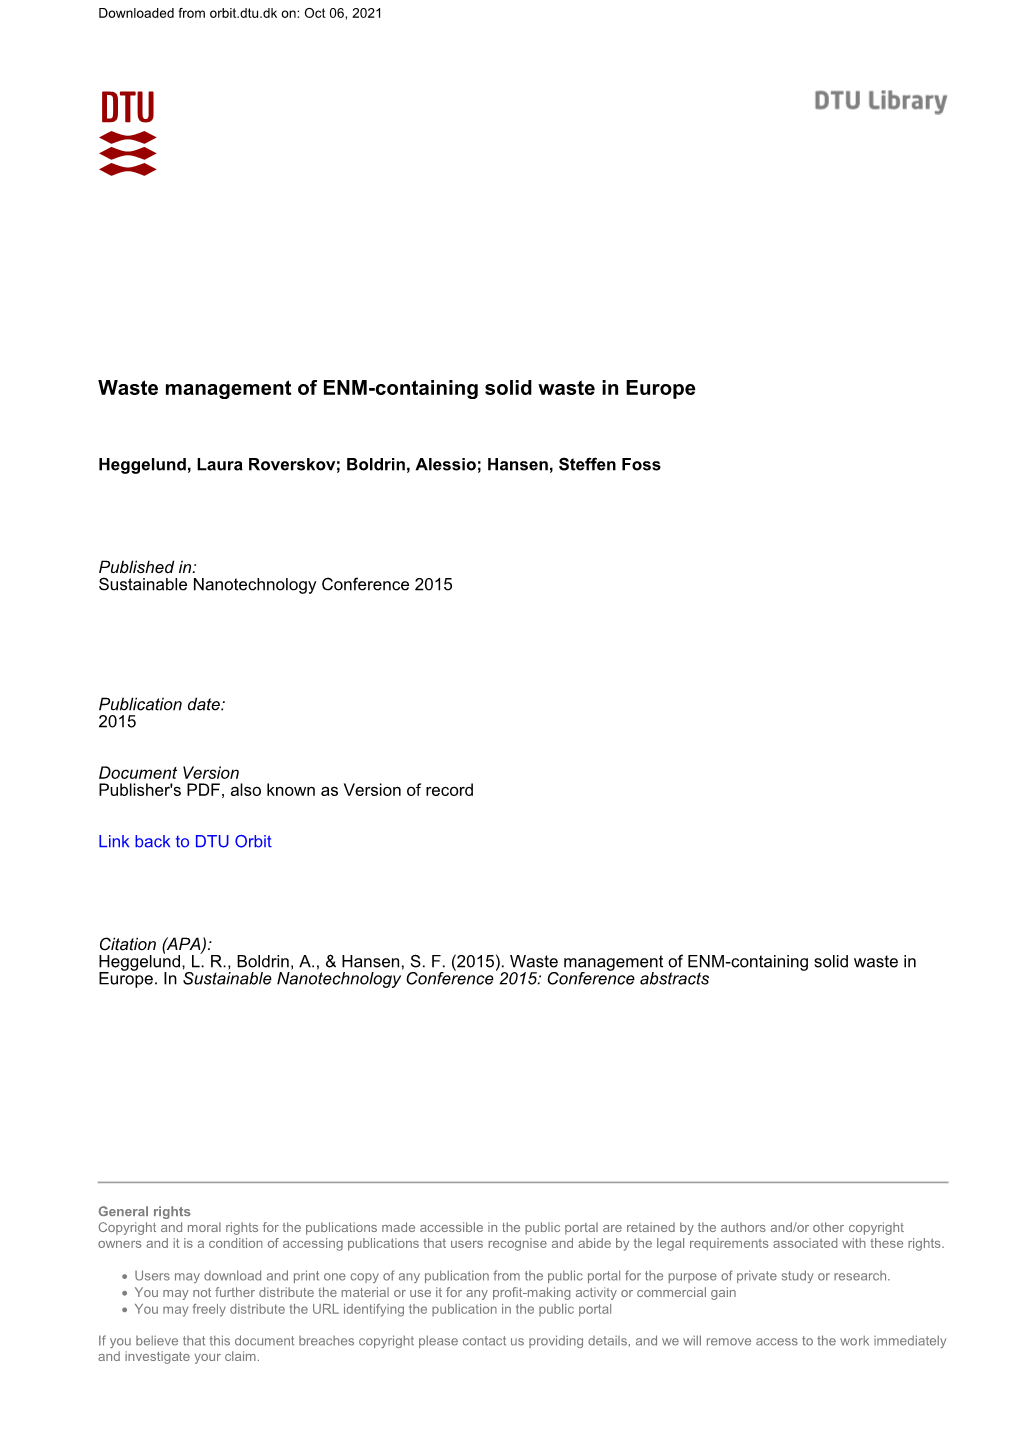 Waste Management of ENM-Containing Solid Waste in Europe